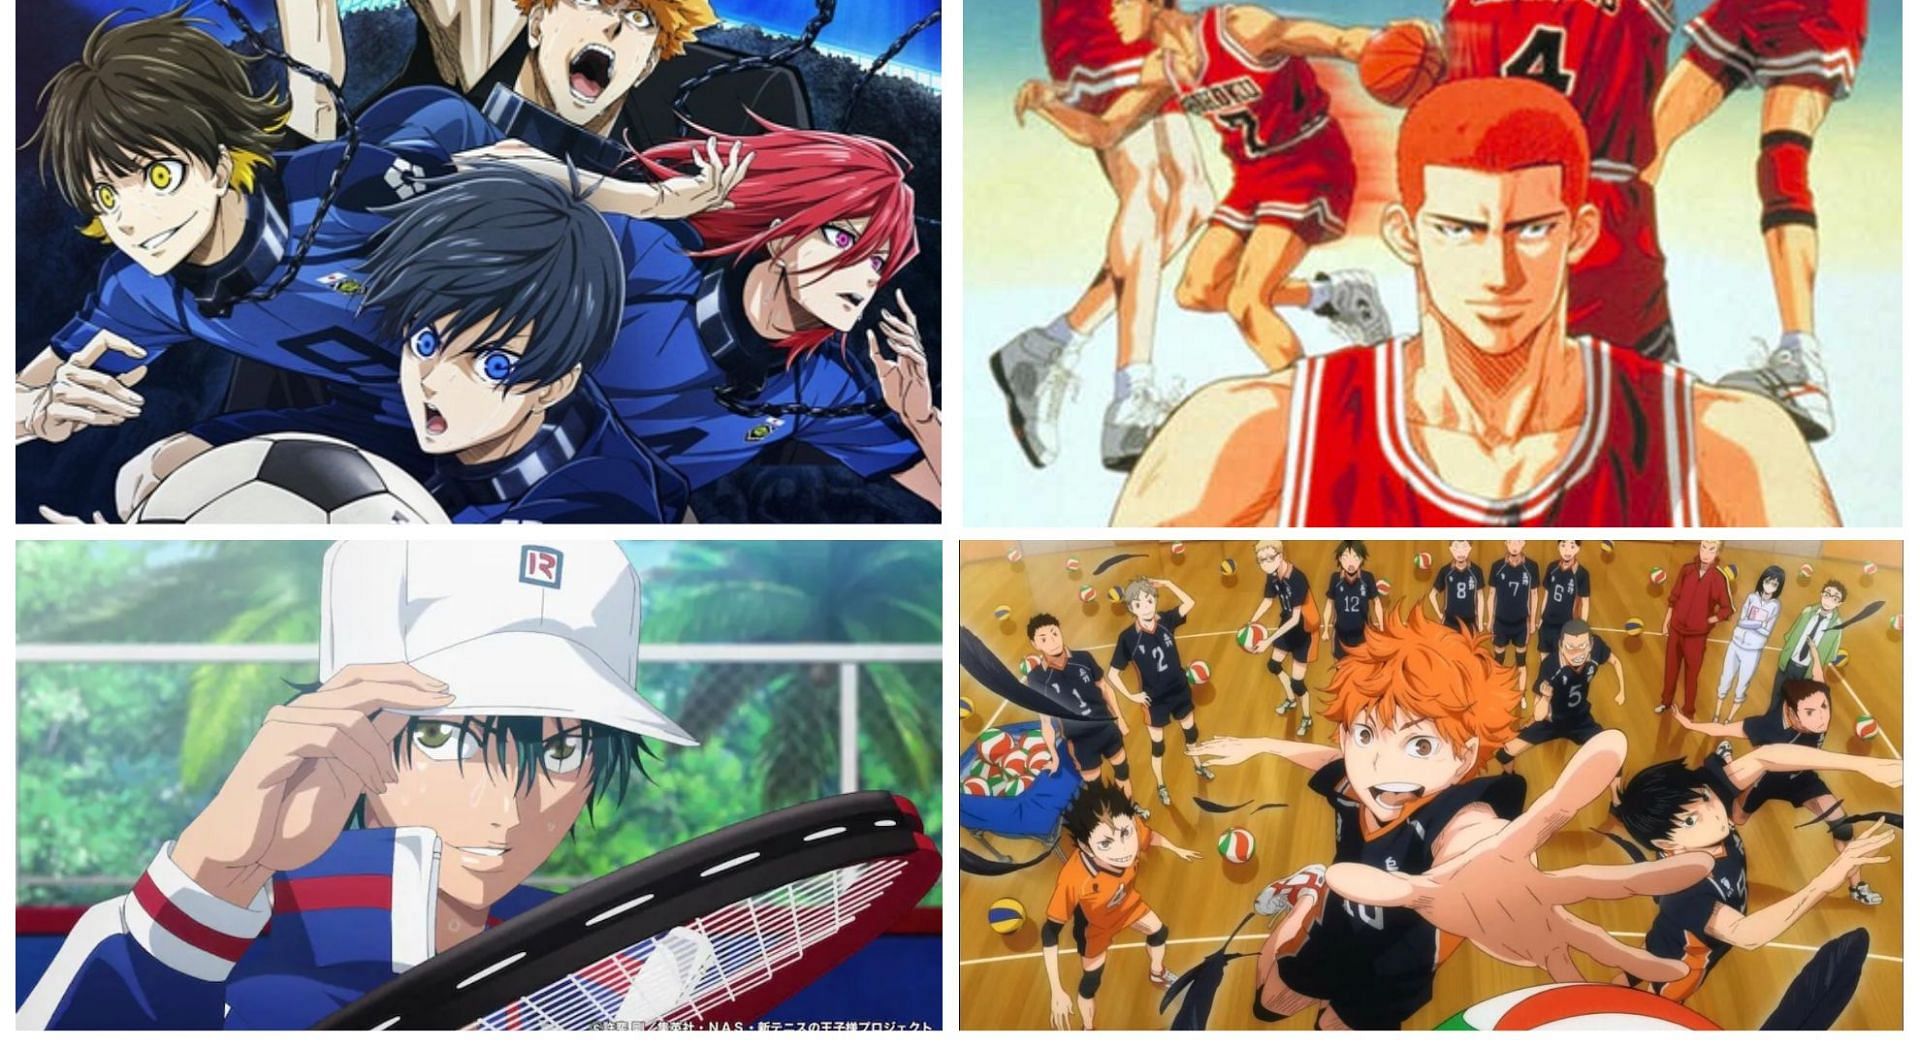 Soccer, Basketball, Volleyball, and Tennis represented in anime form (Image via Sportskeeda)